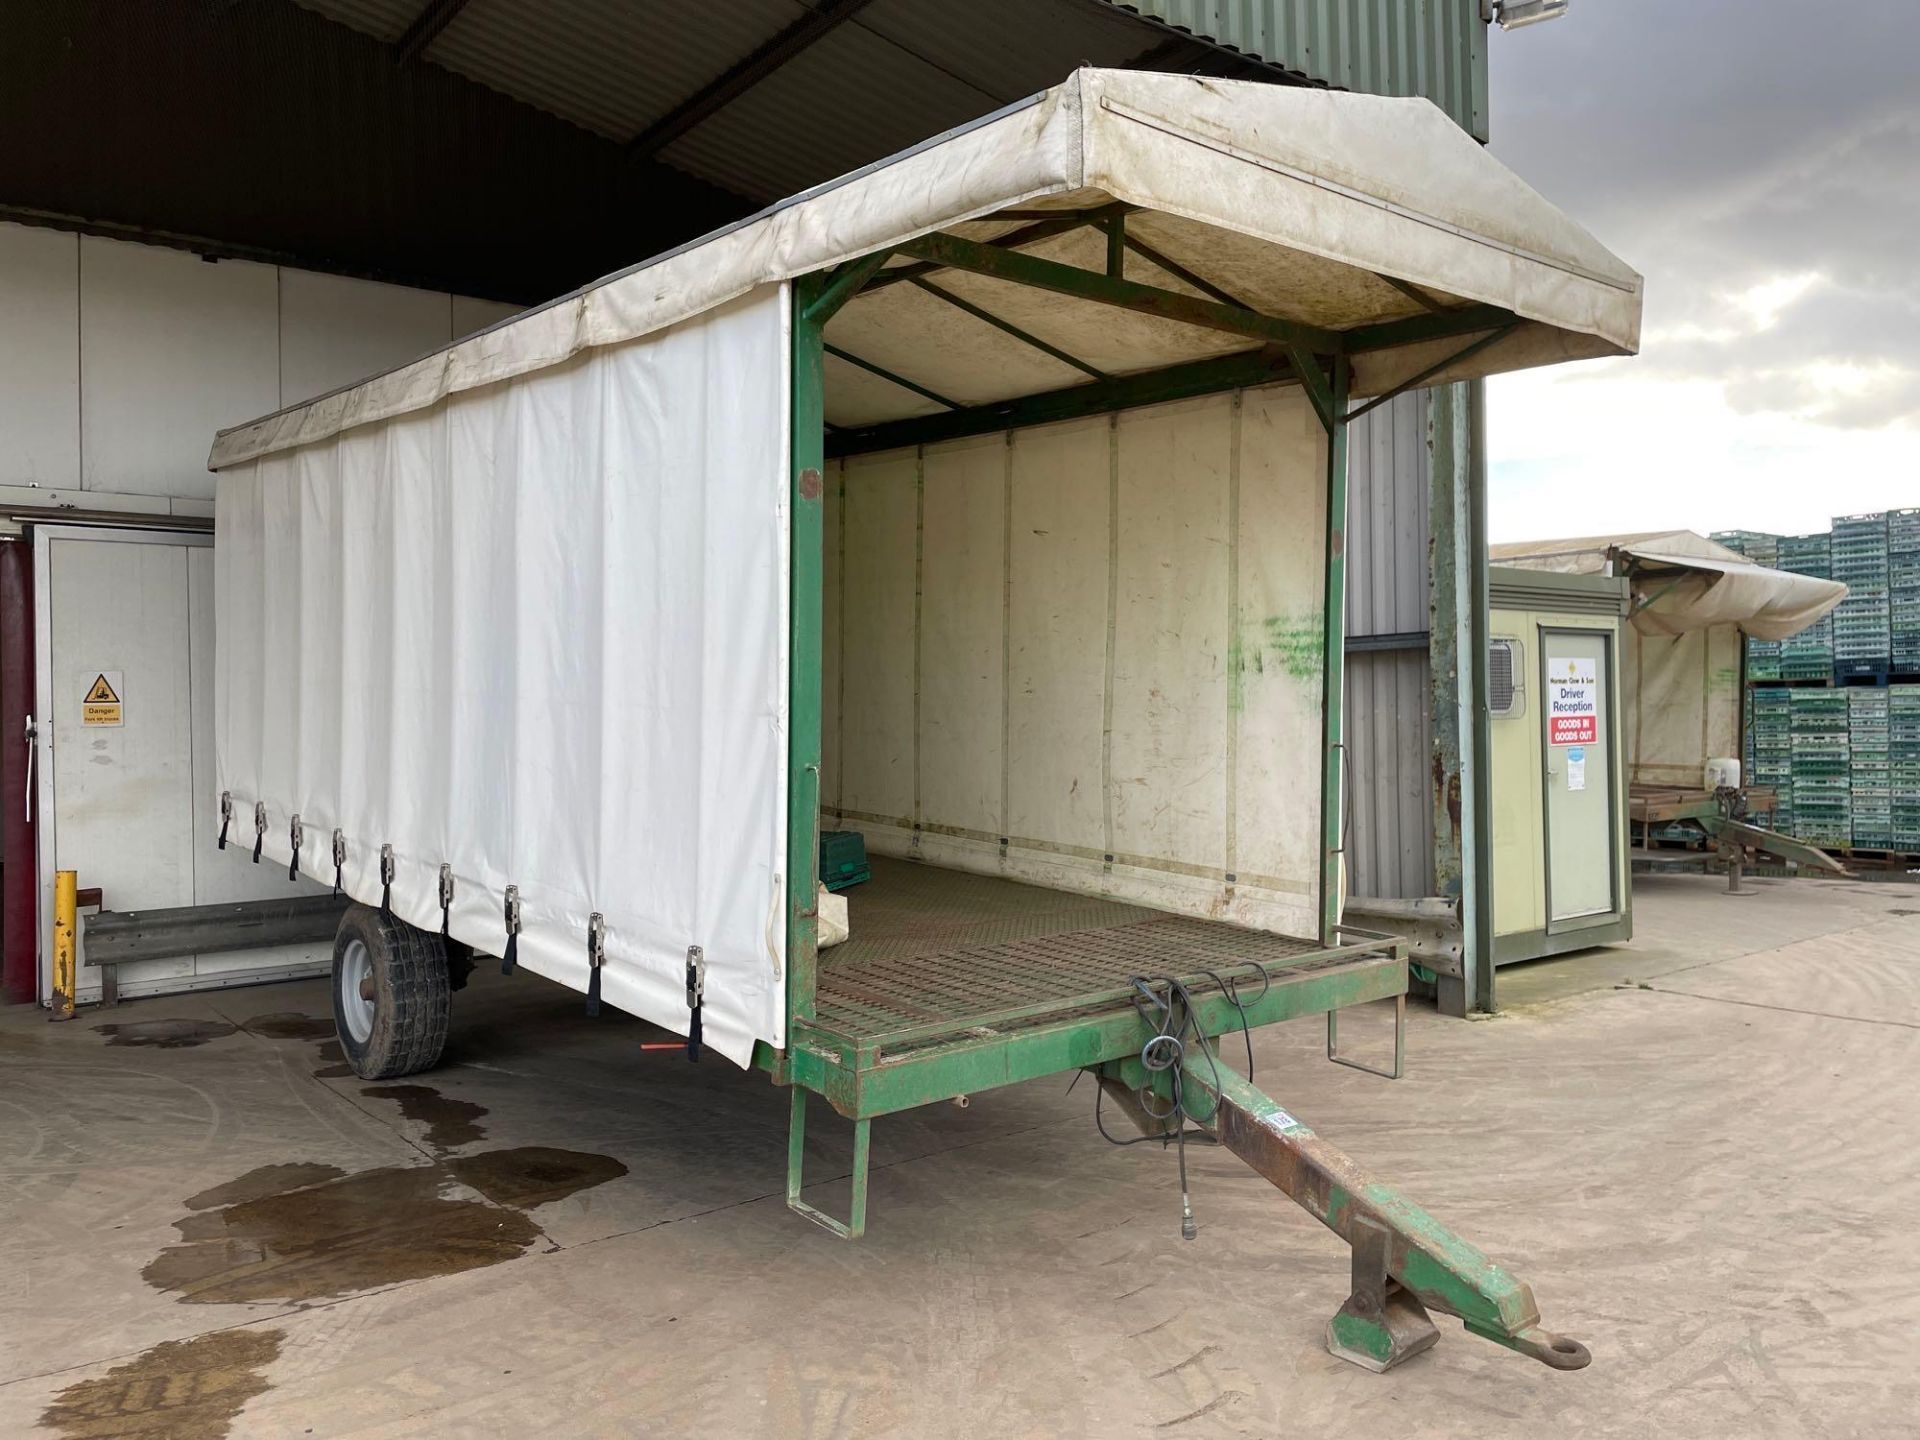 Keith Collingwood curtainside vegetable packing trailer 21ft x 8ft single axle - Image 2 of 3